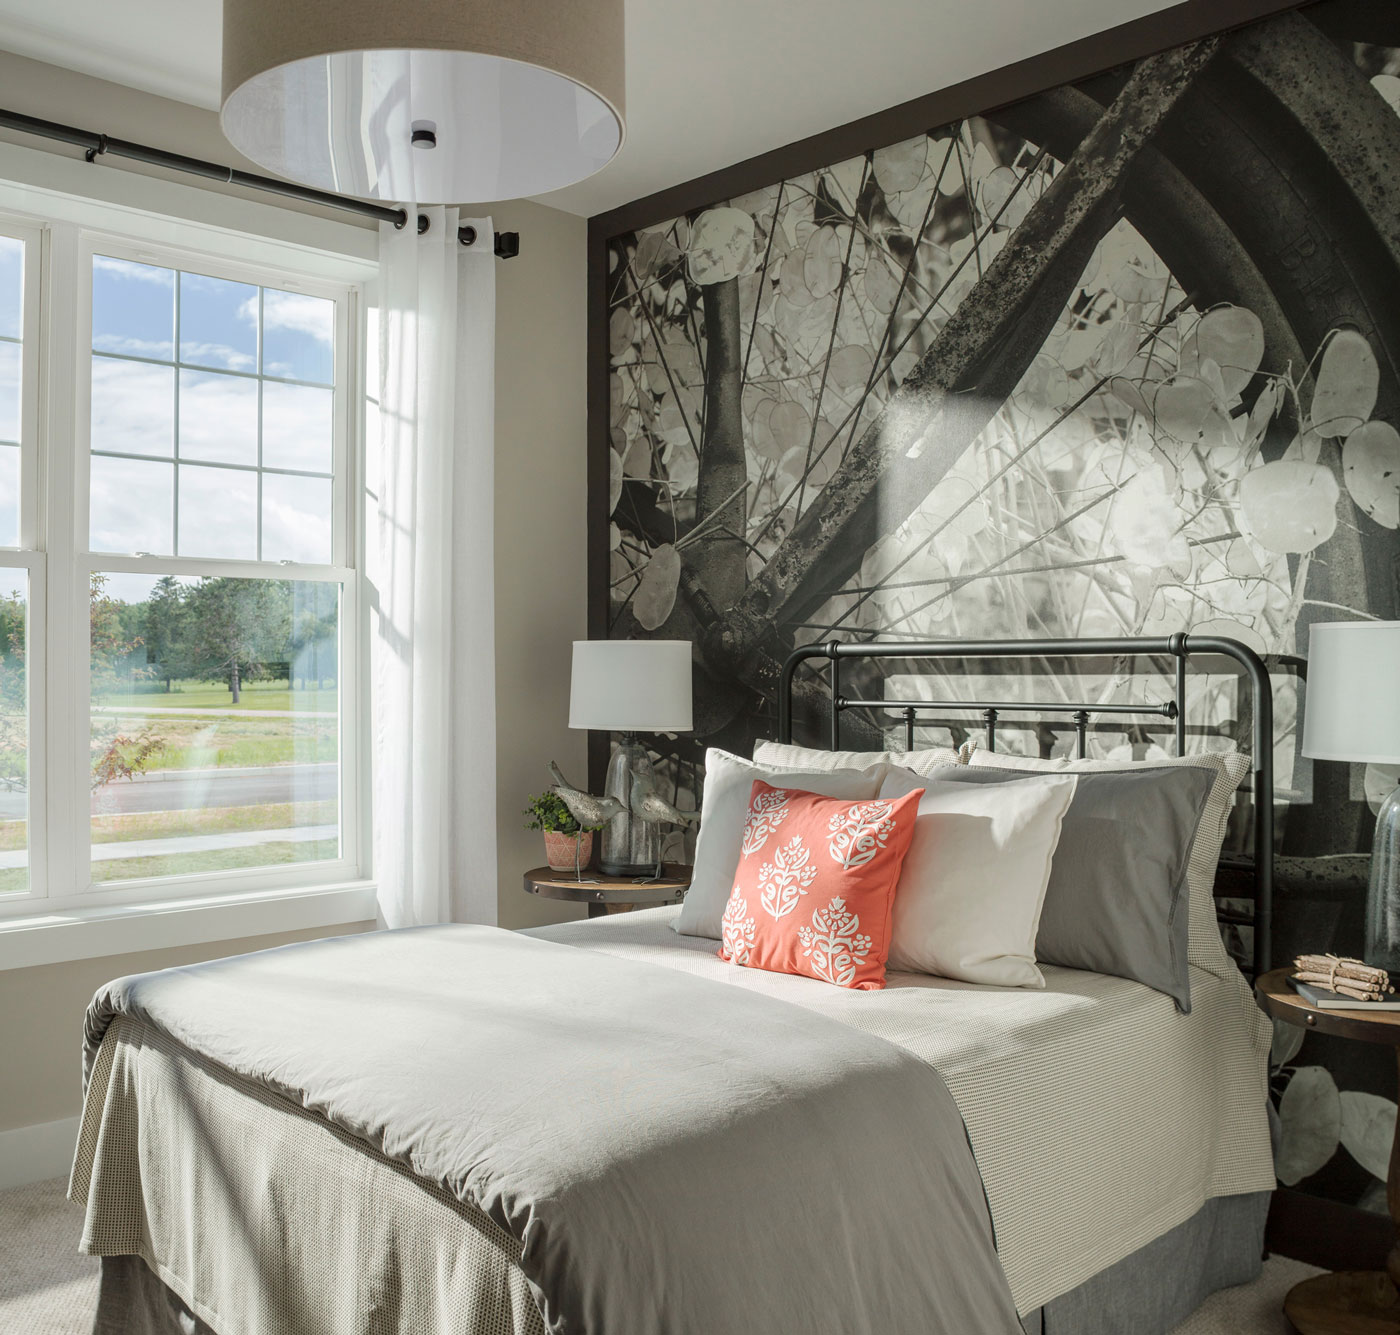 Full wall mural brings outside in and soft gray finishes help create a relaxing bedroom in Vermont model home.